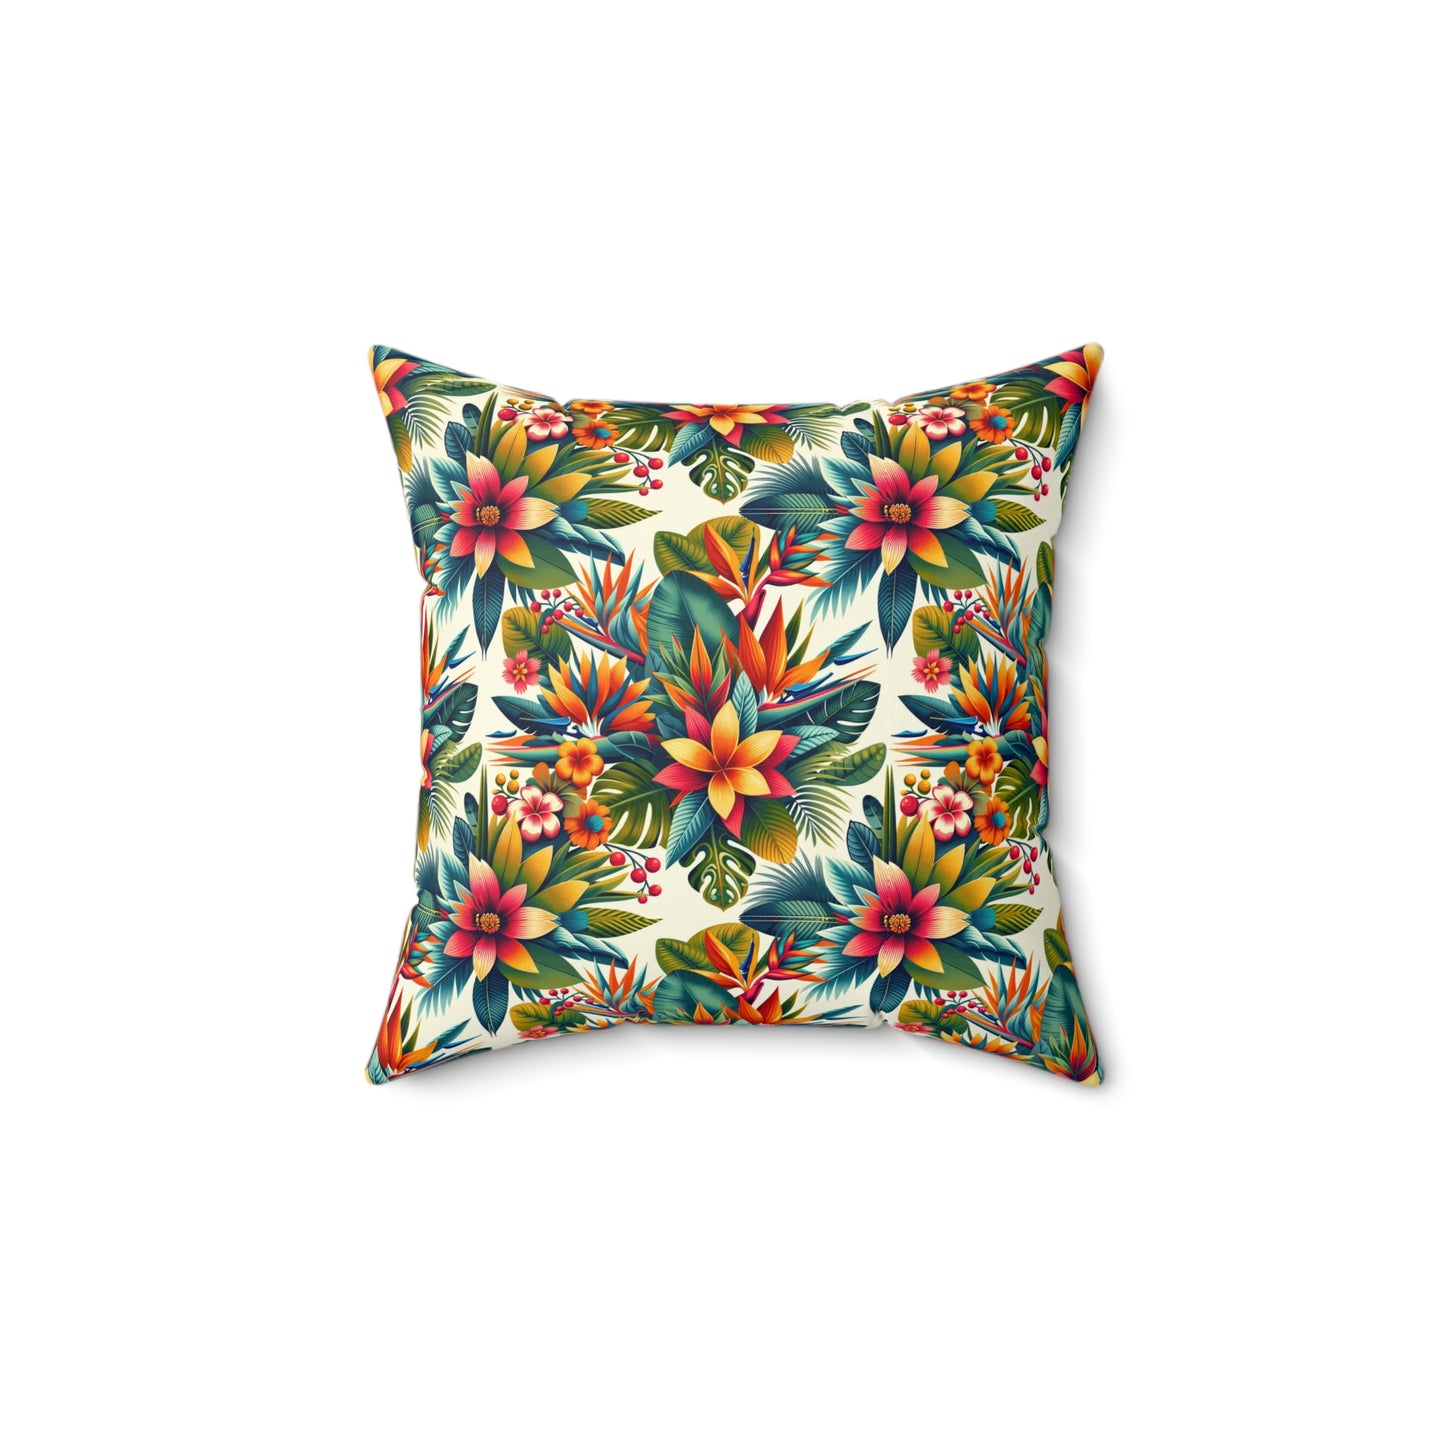 Tropical Paradise: Lush Floral and Foliage Pillow Design